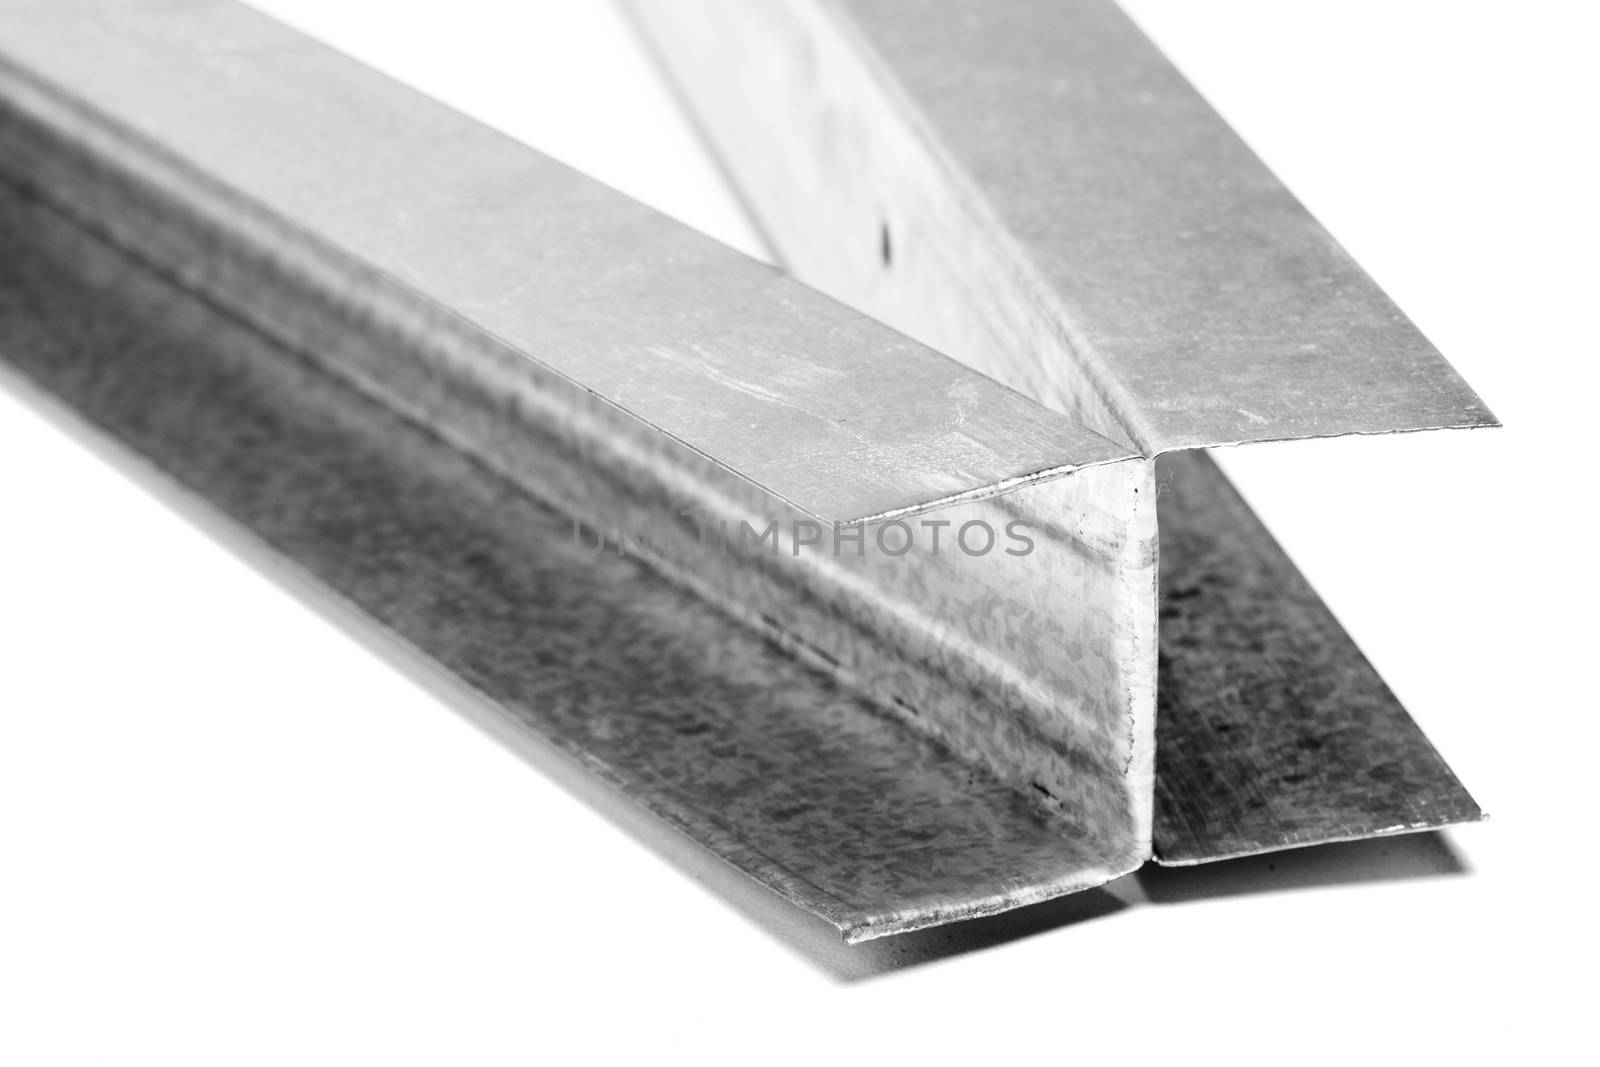 U shaped metal profile for drywall support isolated on white background